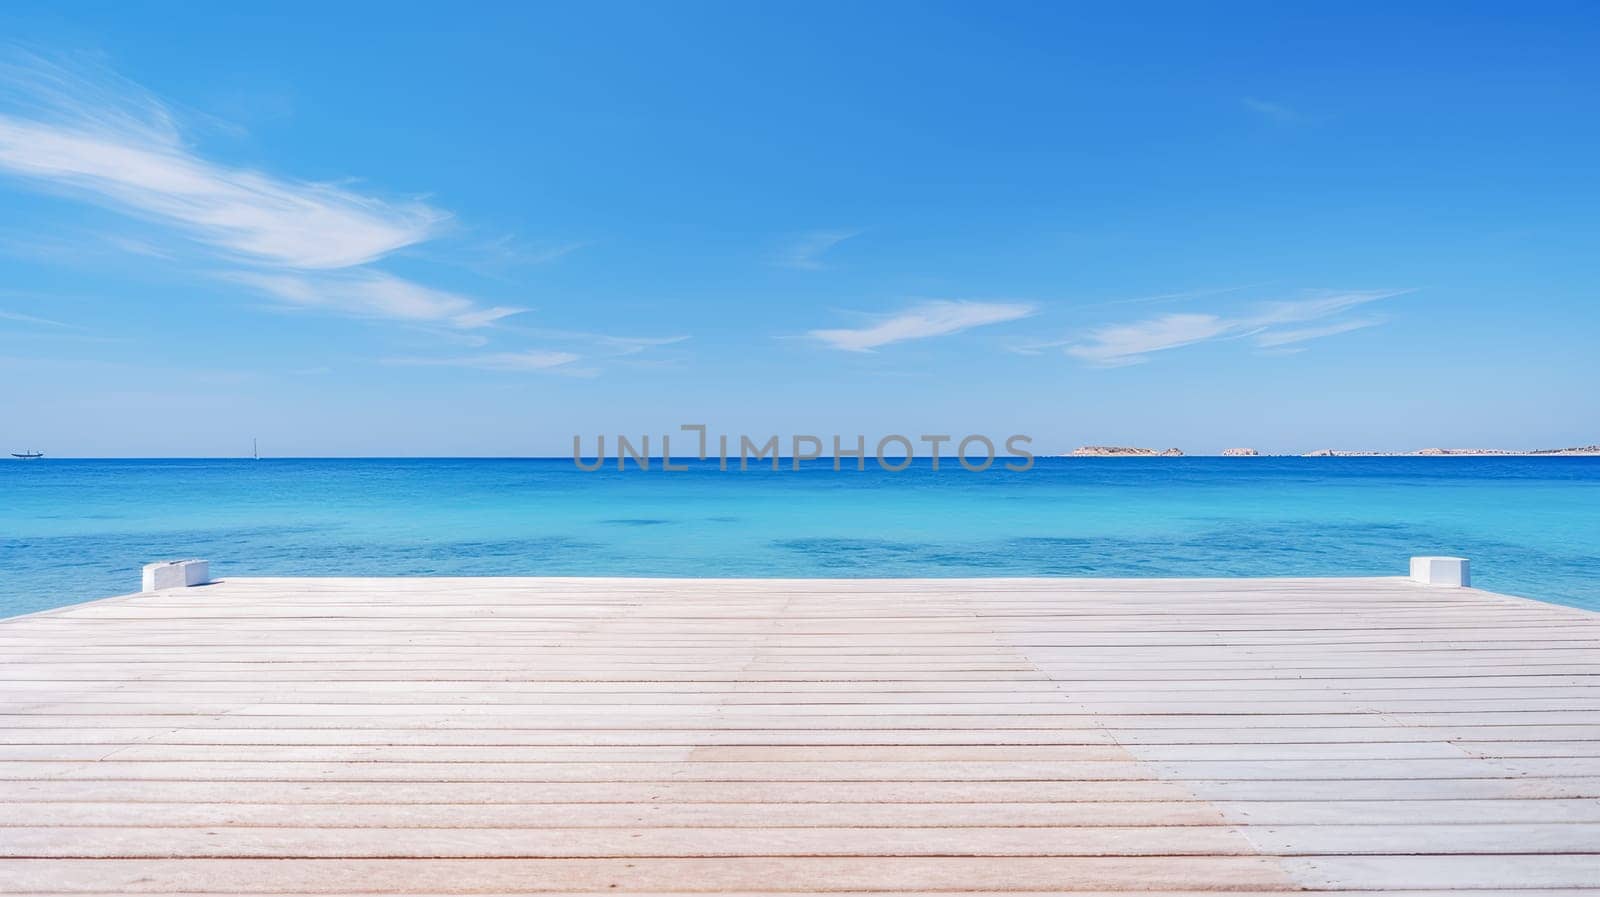 Beautiful beach with a wooden pier and azure water in the Maldives, islands. Beautiful landscape, picture, phone screensaver, copy space, advertising, travel agency, tourism, solitude with nature, without people